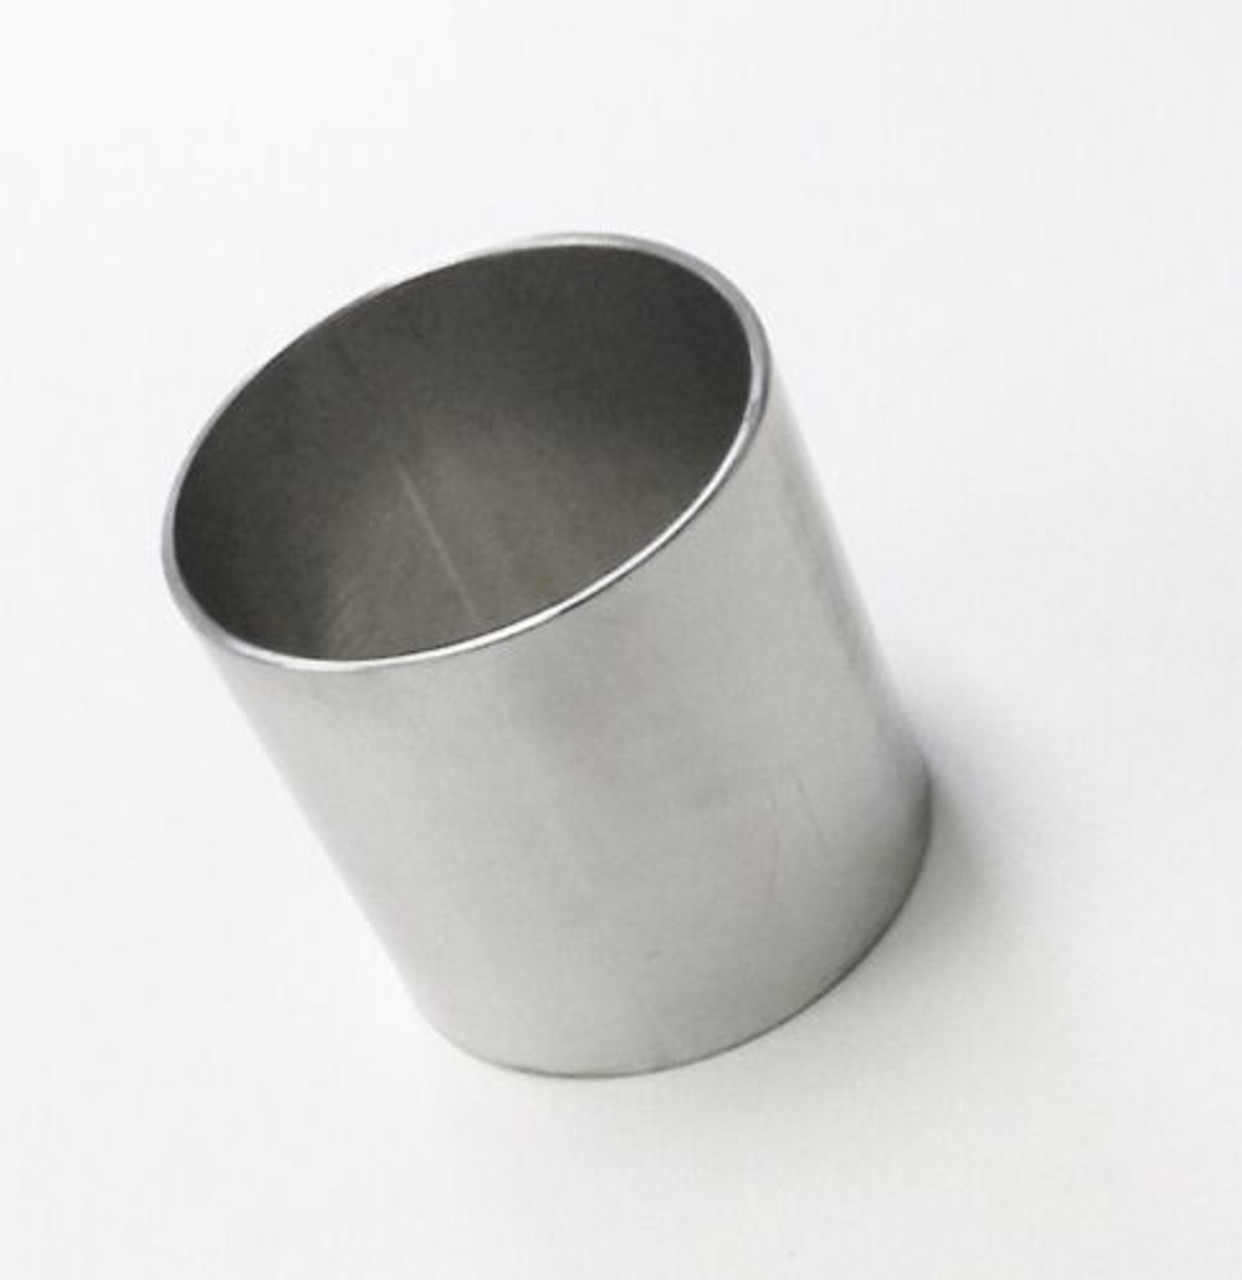 Jewelry Casting Flask 2"x2-1/2" Stainless Steel Dental Laboratory Casting Ring Thin Wall